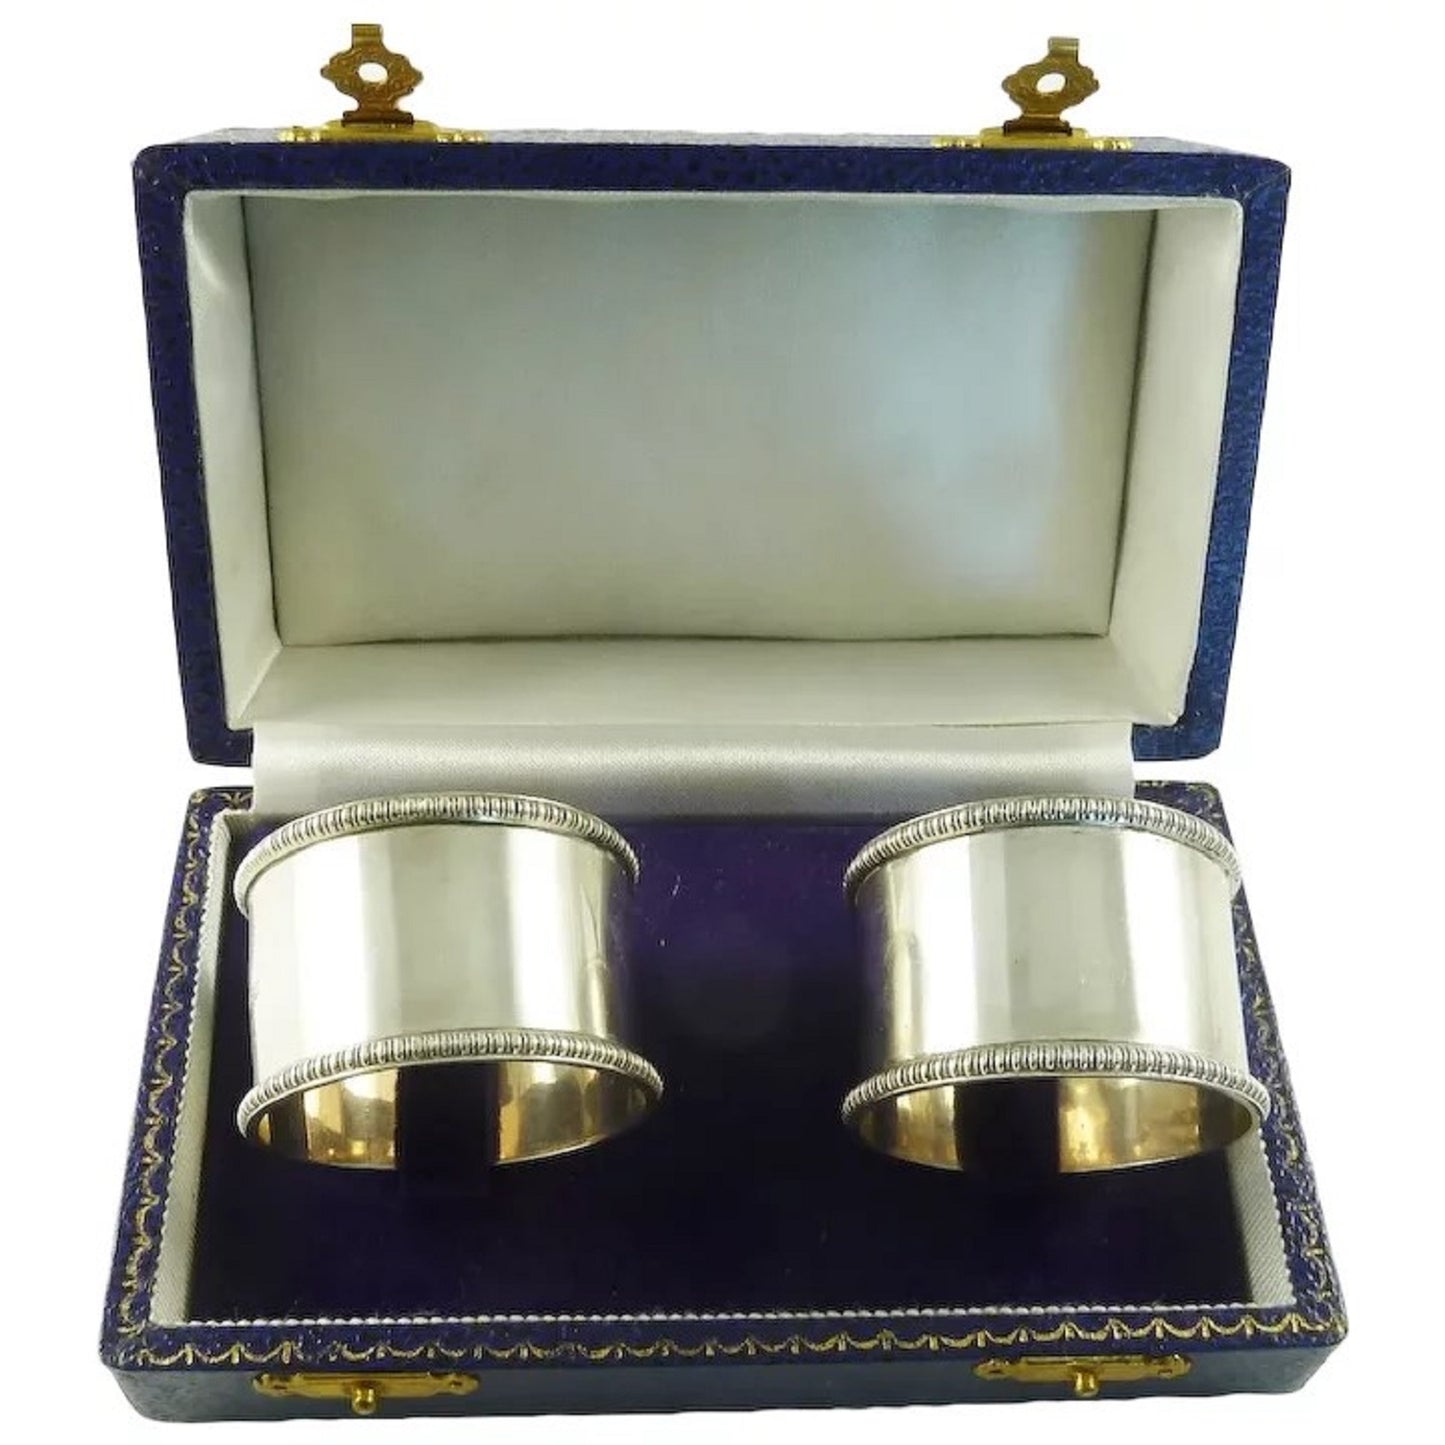 Antique English Sterling Silver Napkin Rings Pair with Gadroon Border Boxed Set - 43 Chesapeake Court Antiques